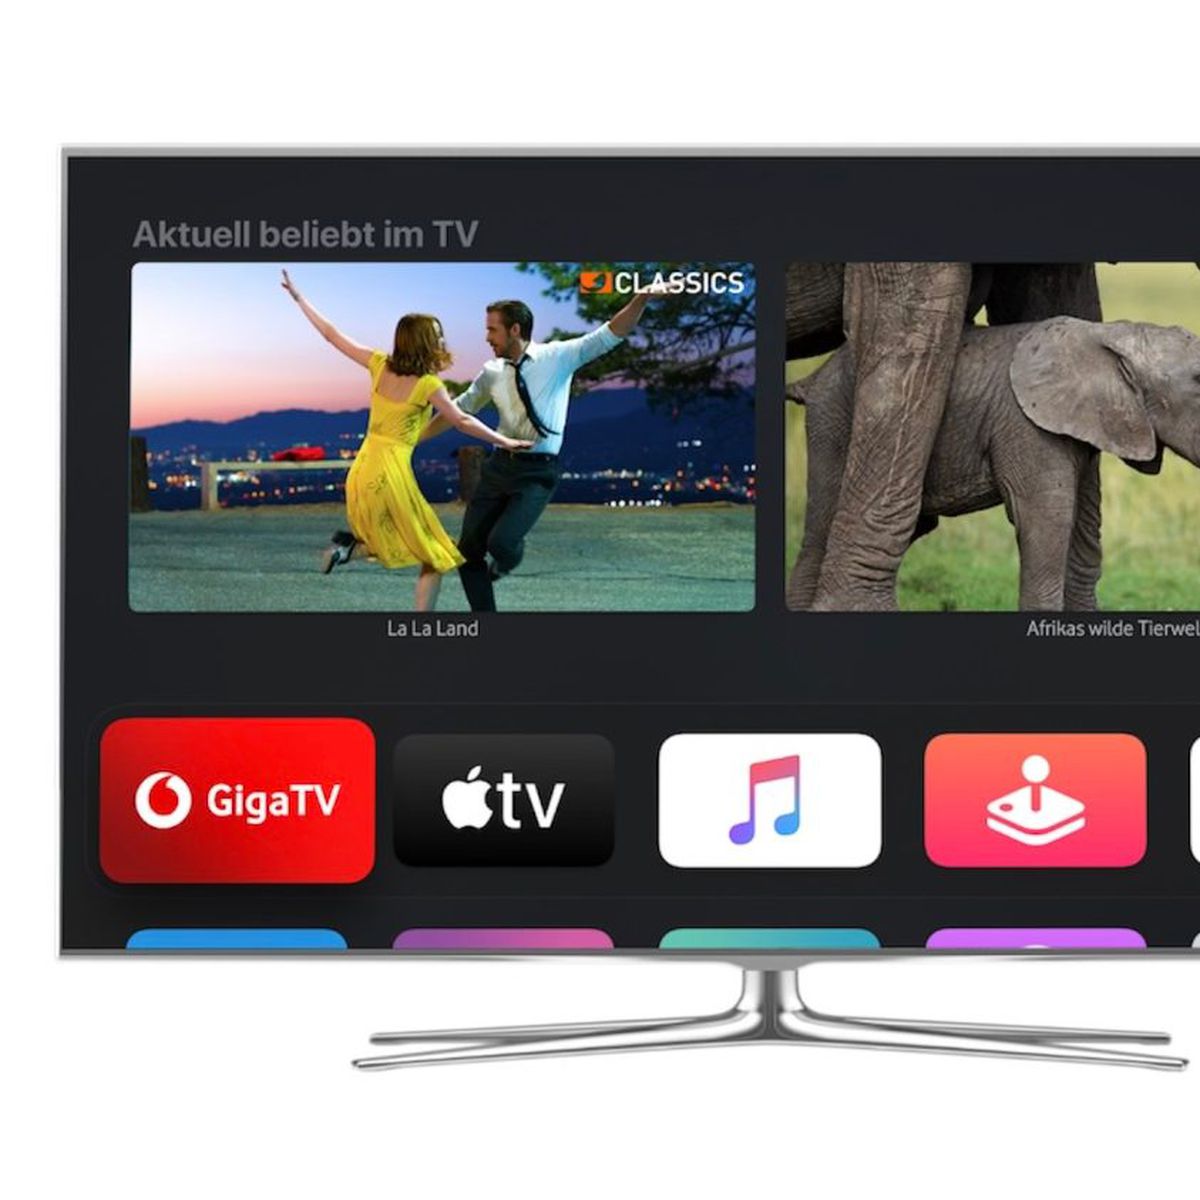 Vodafone Germany Provides Apple TV 4K With Every GigaTV Contract - MacRumors